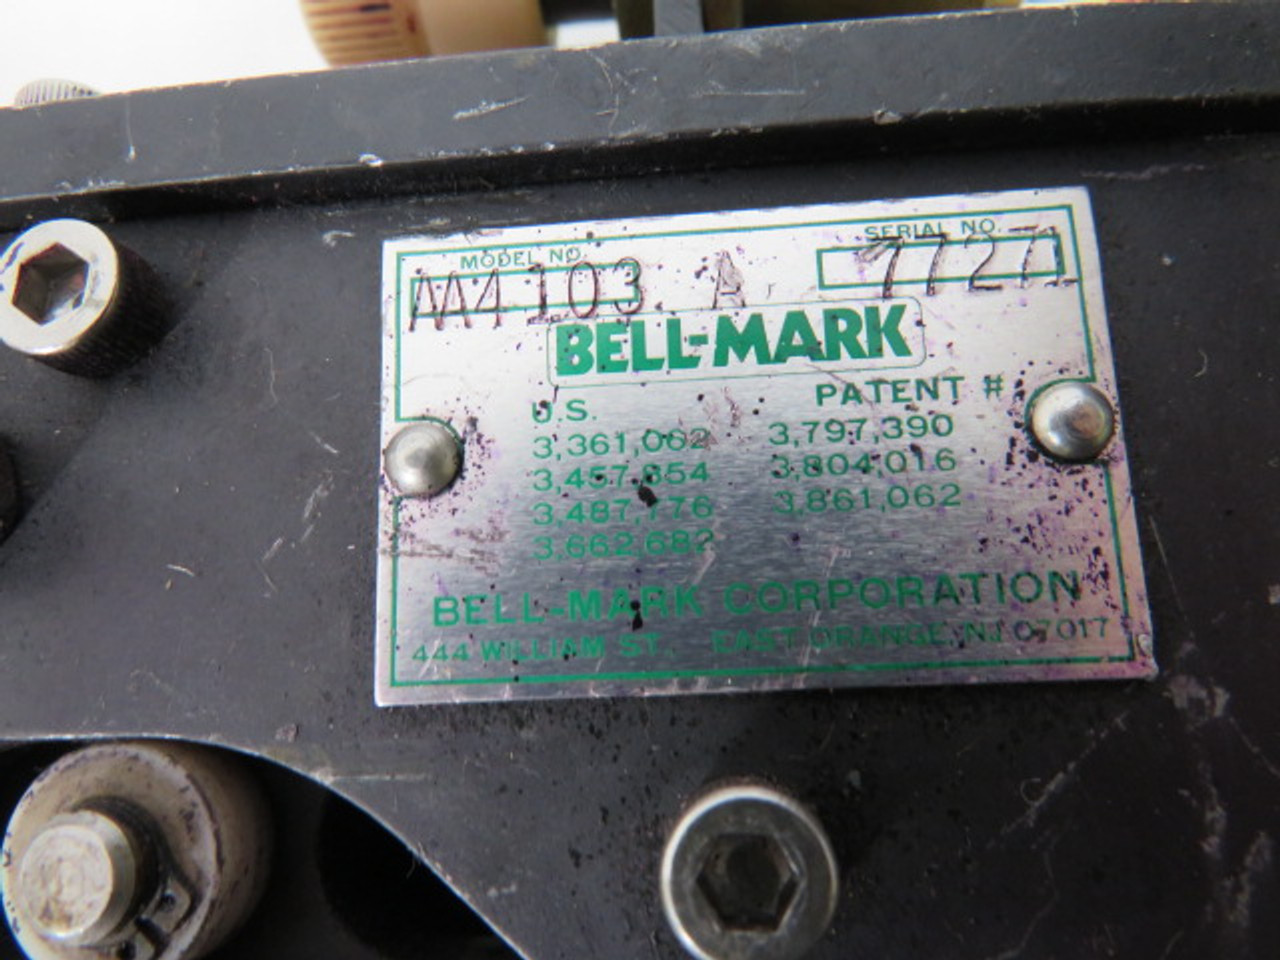 Bell-Mark AA4103-A Pneumatic Coder Coding System *Missing Bottom* ! AS IS !